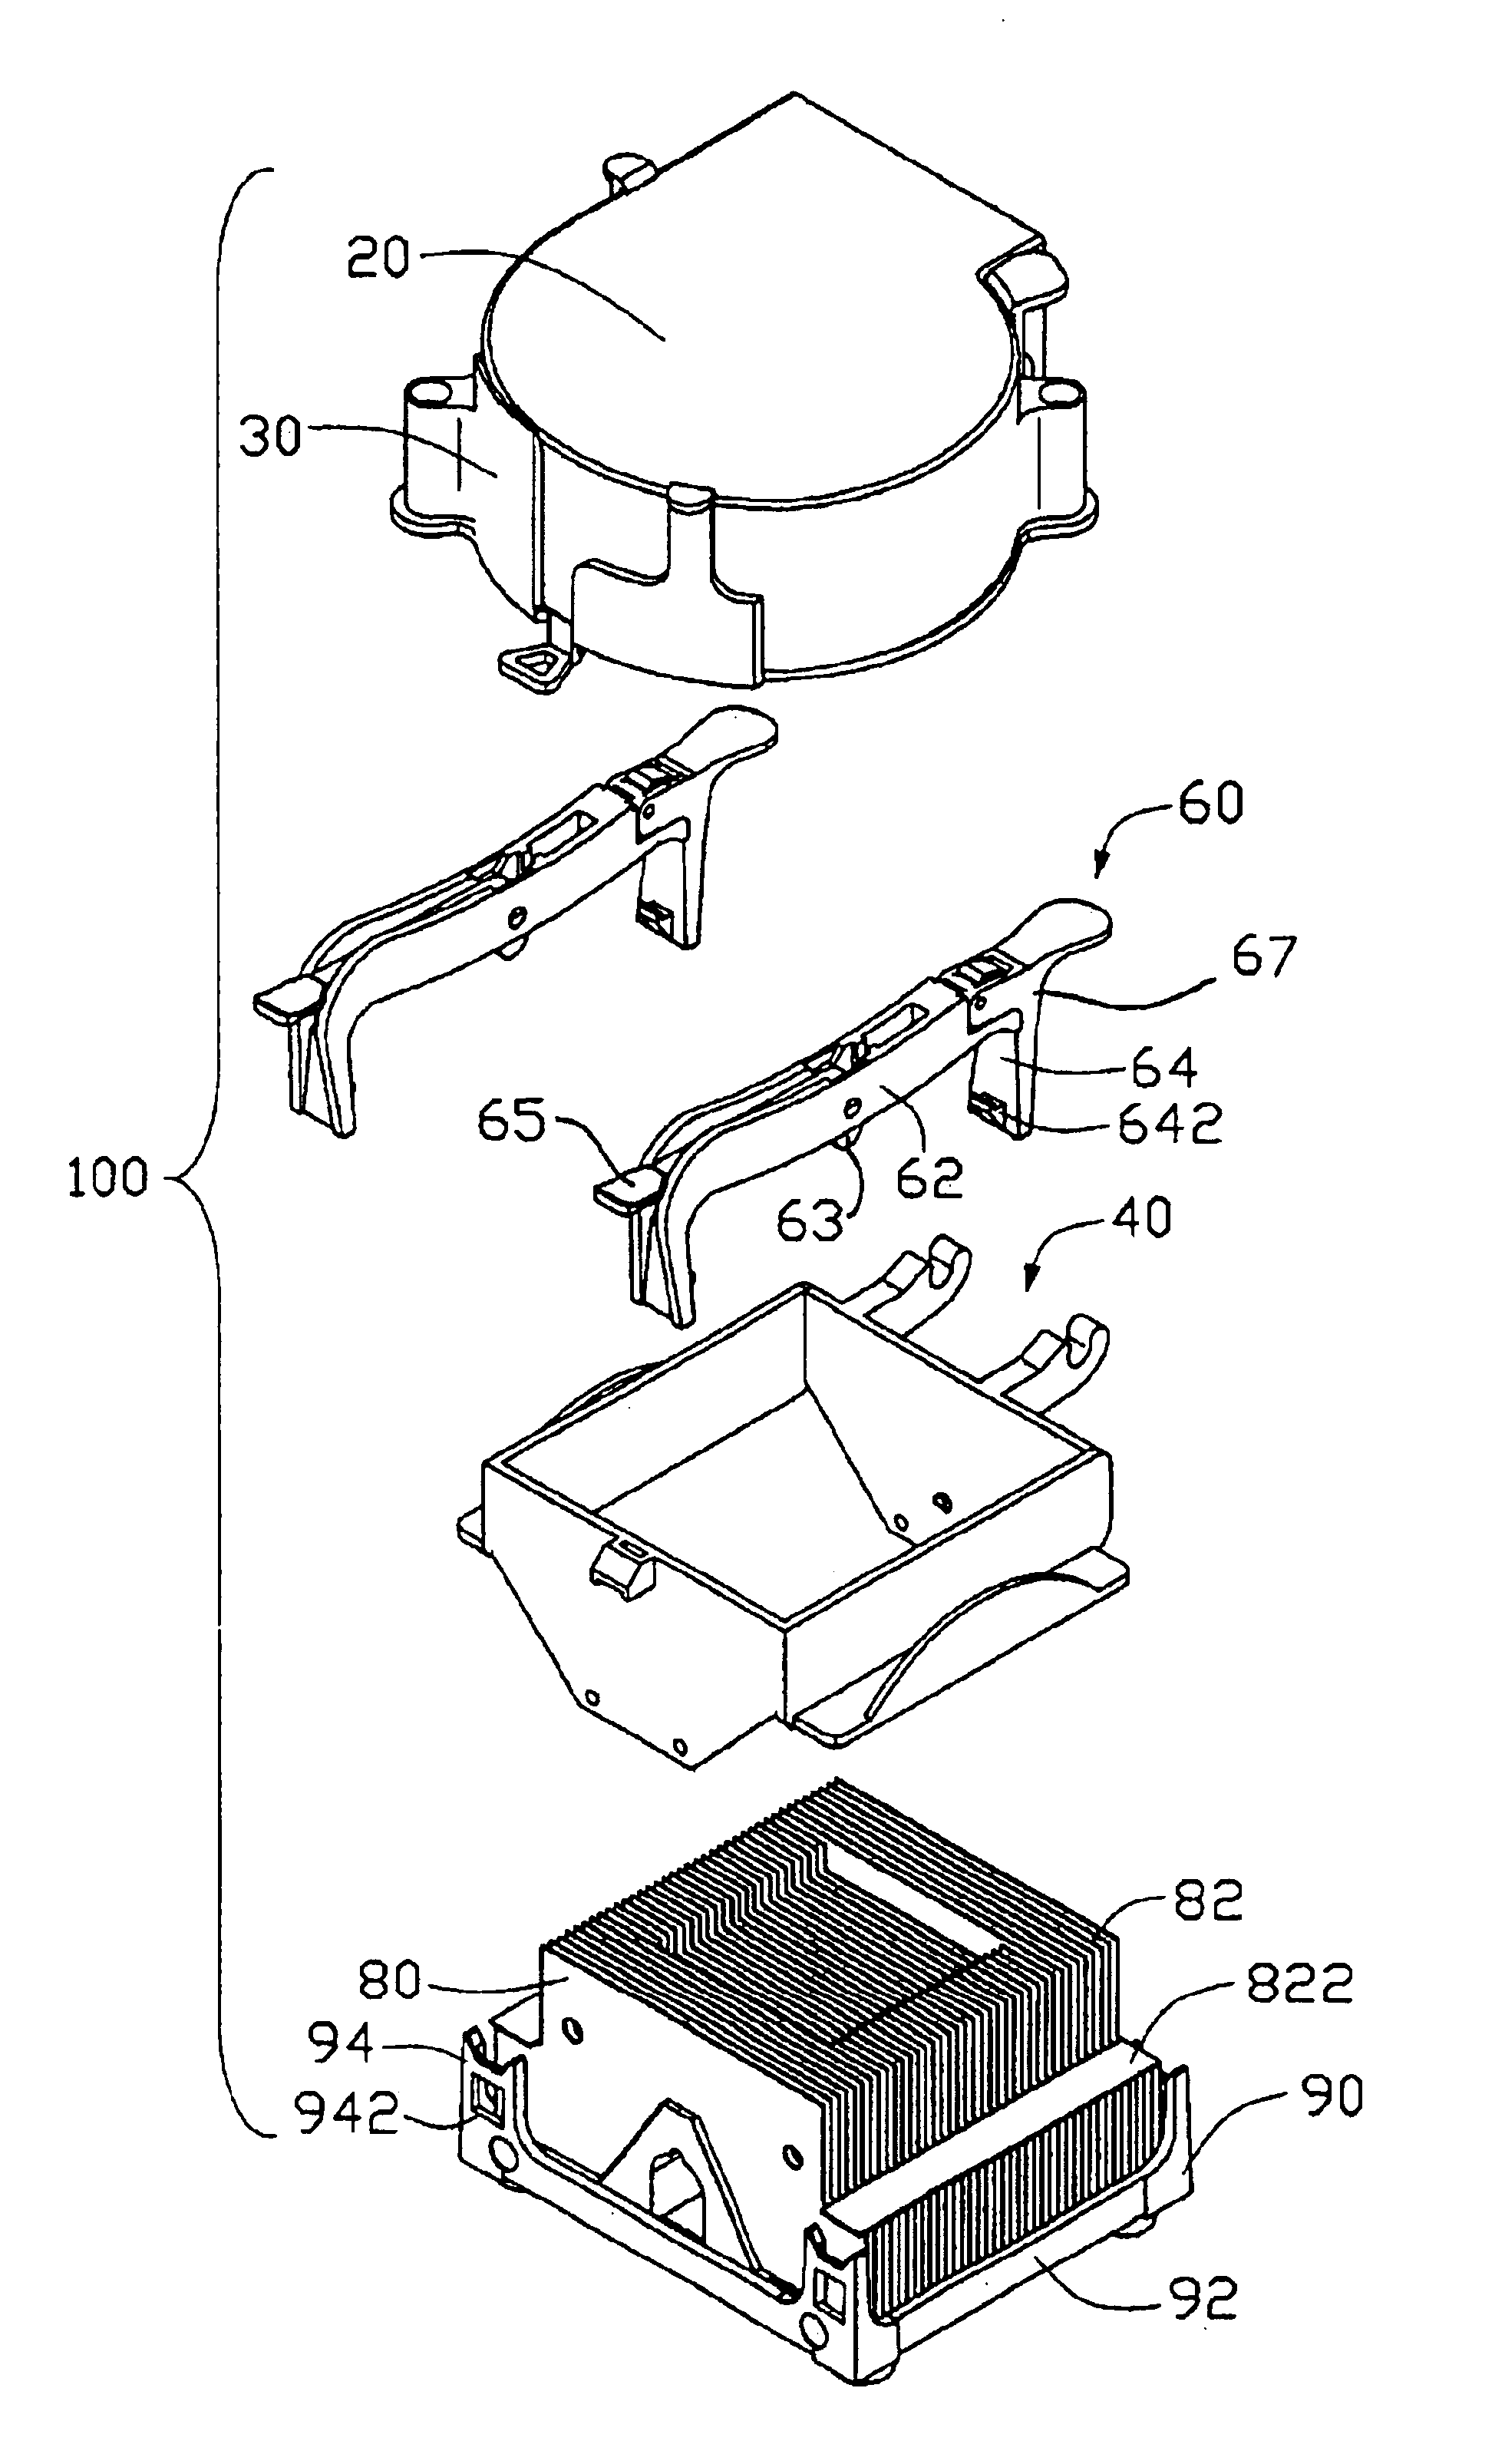 Heat dissipation assembly including heat sink and fan